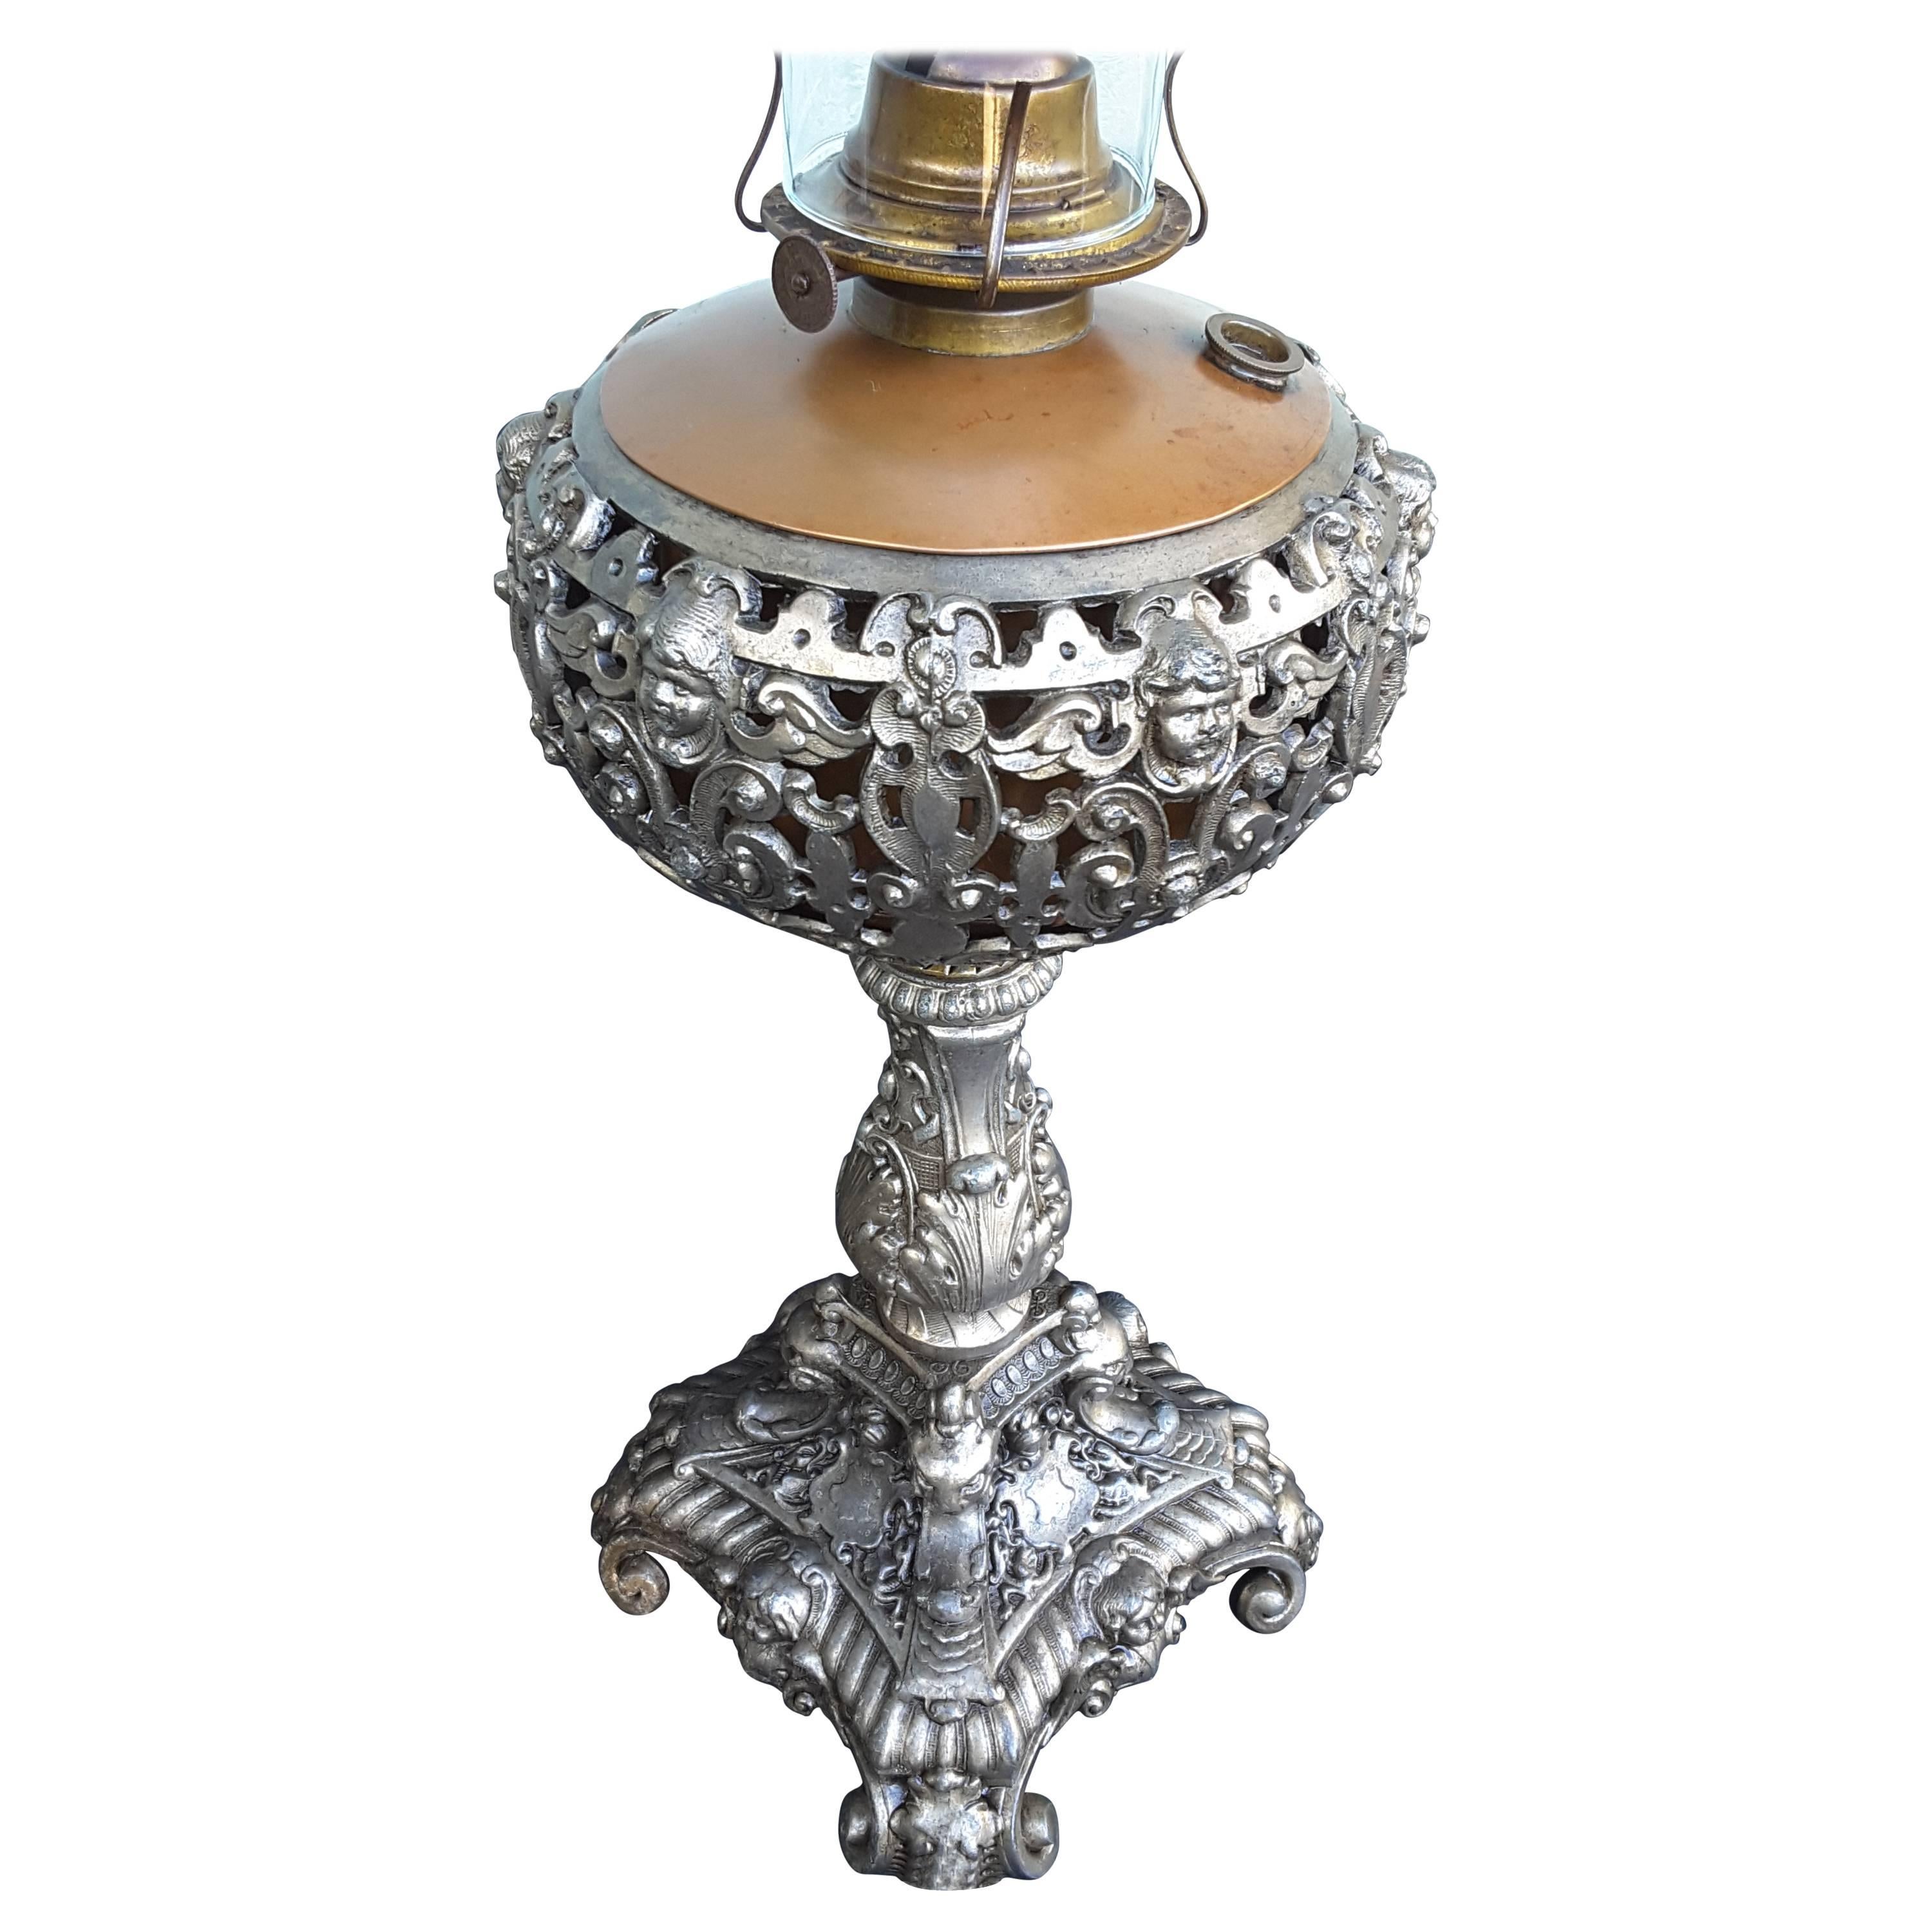 Angel Face Oil Lamp Silver Tone Finish Scrolled Foot & Acanthus Leaf Decoration